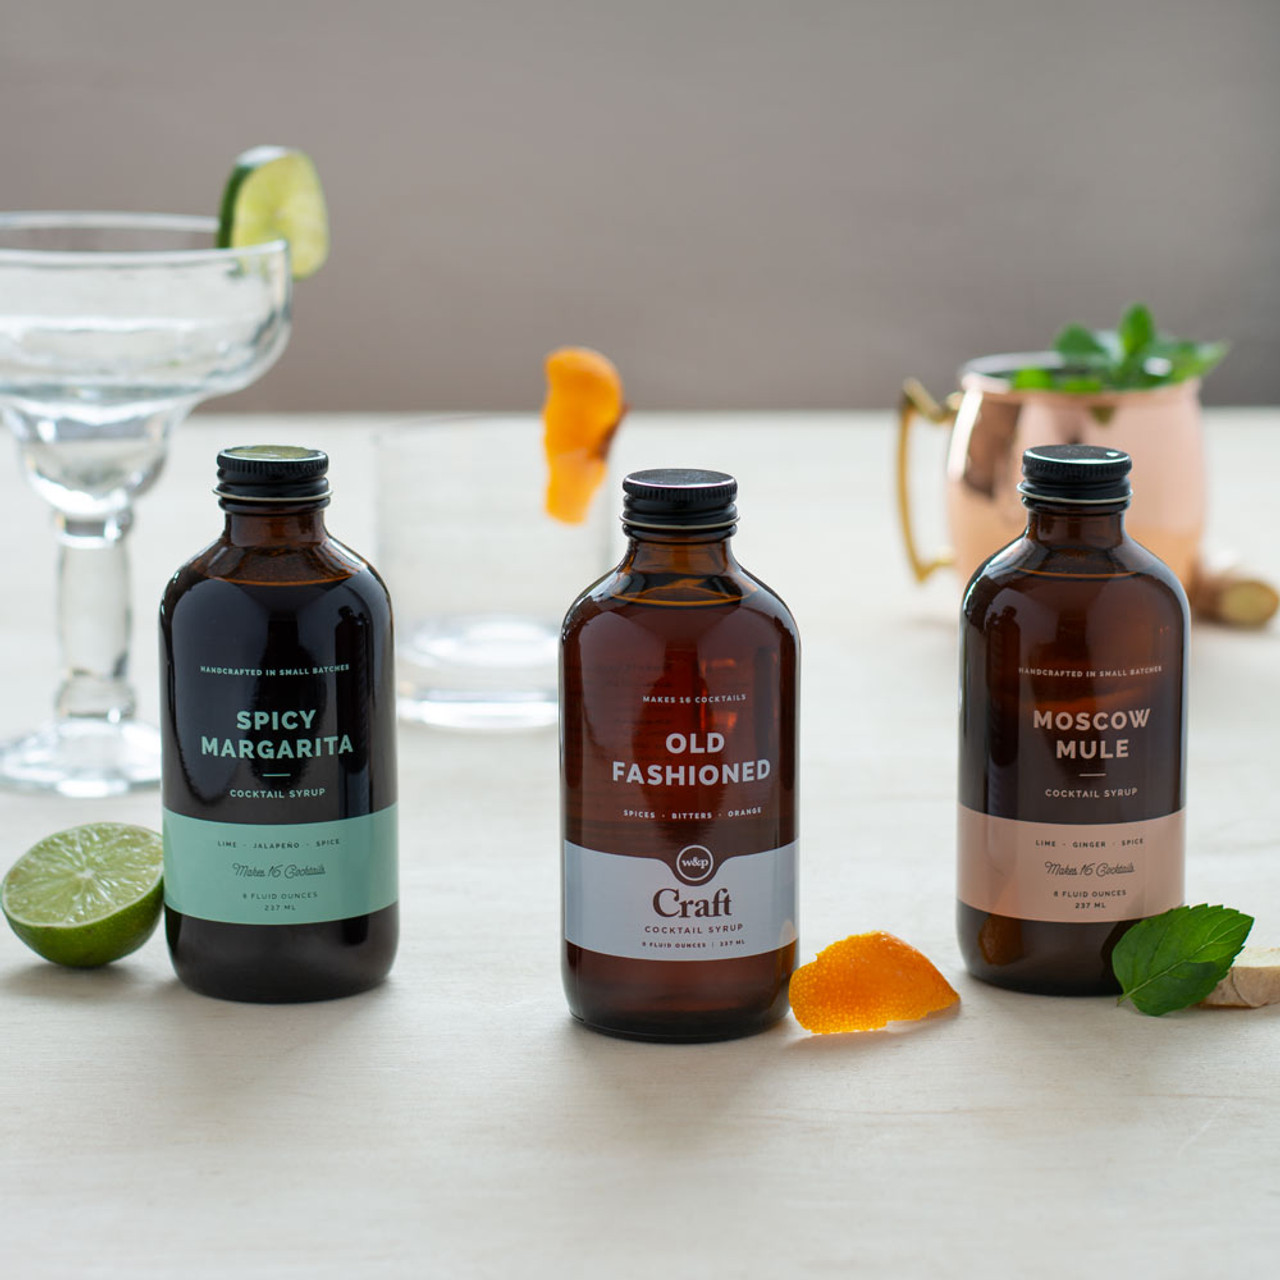 The Moscow Mule Cocktail Kit by W&P